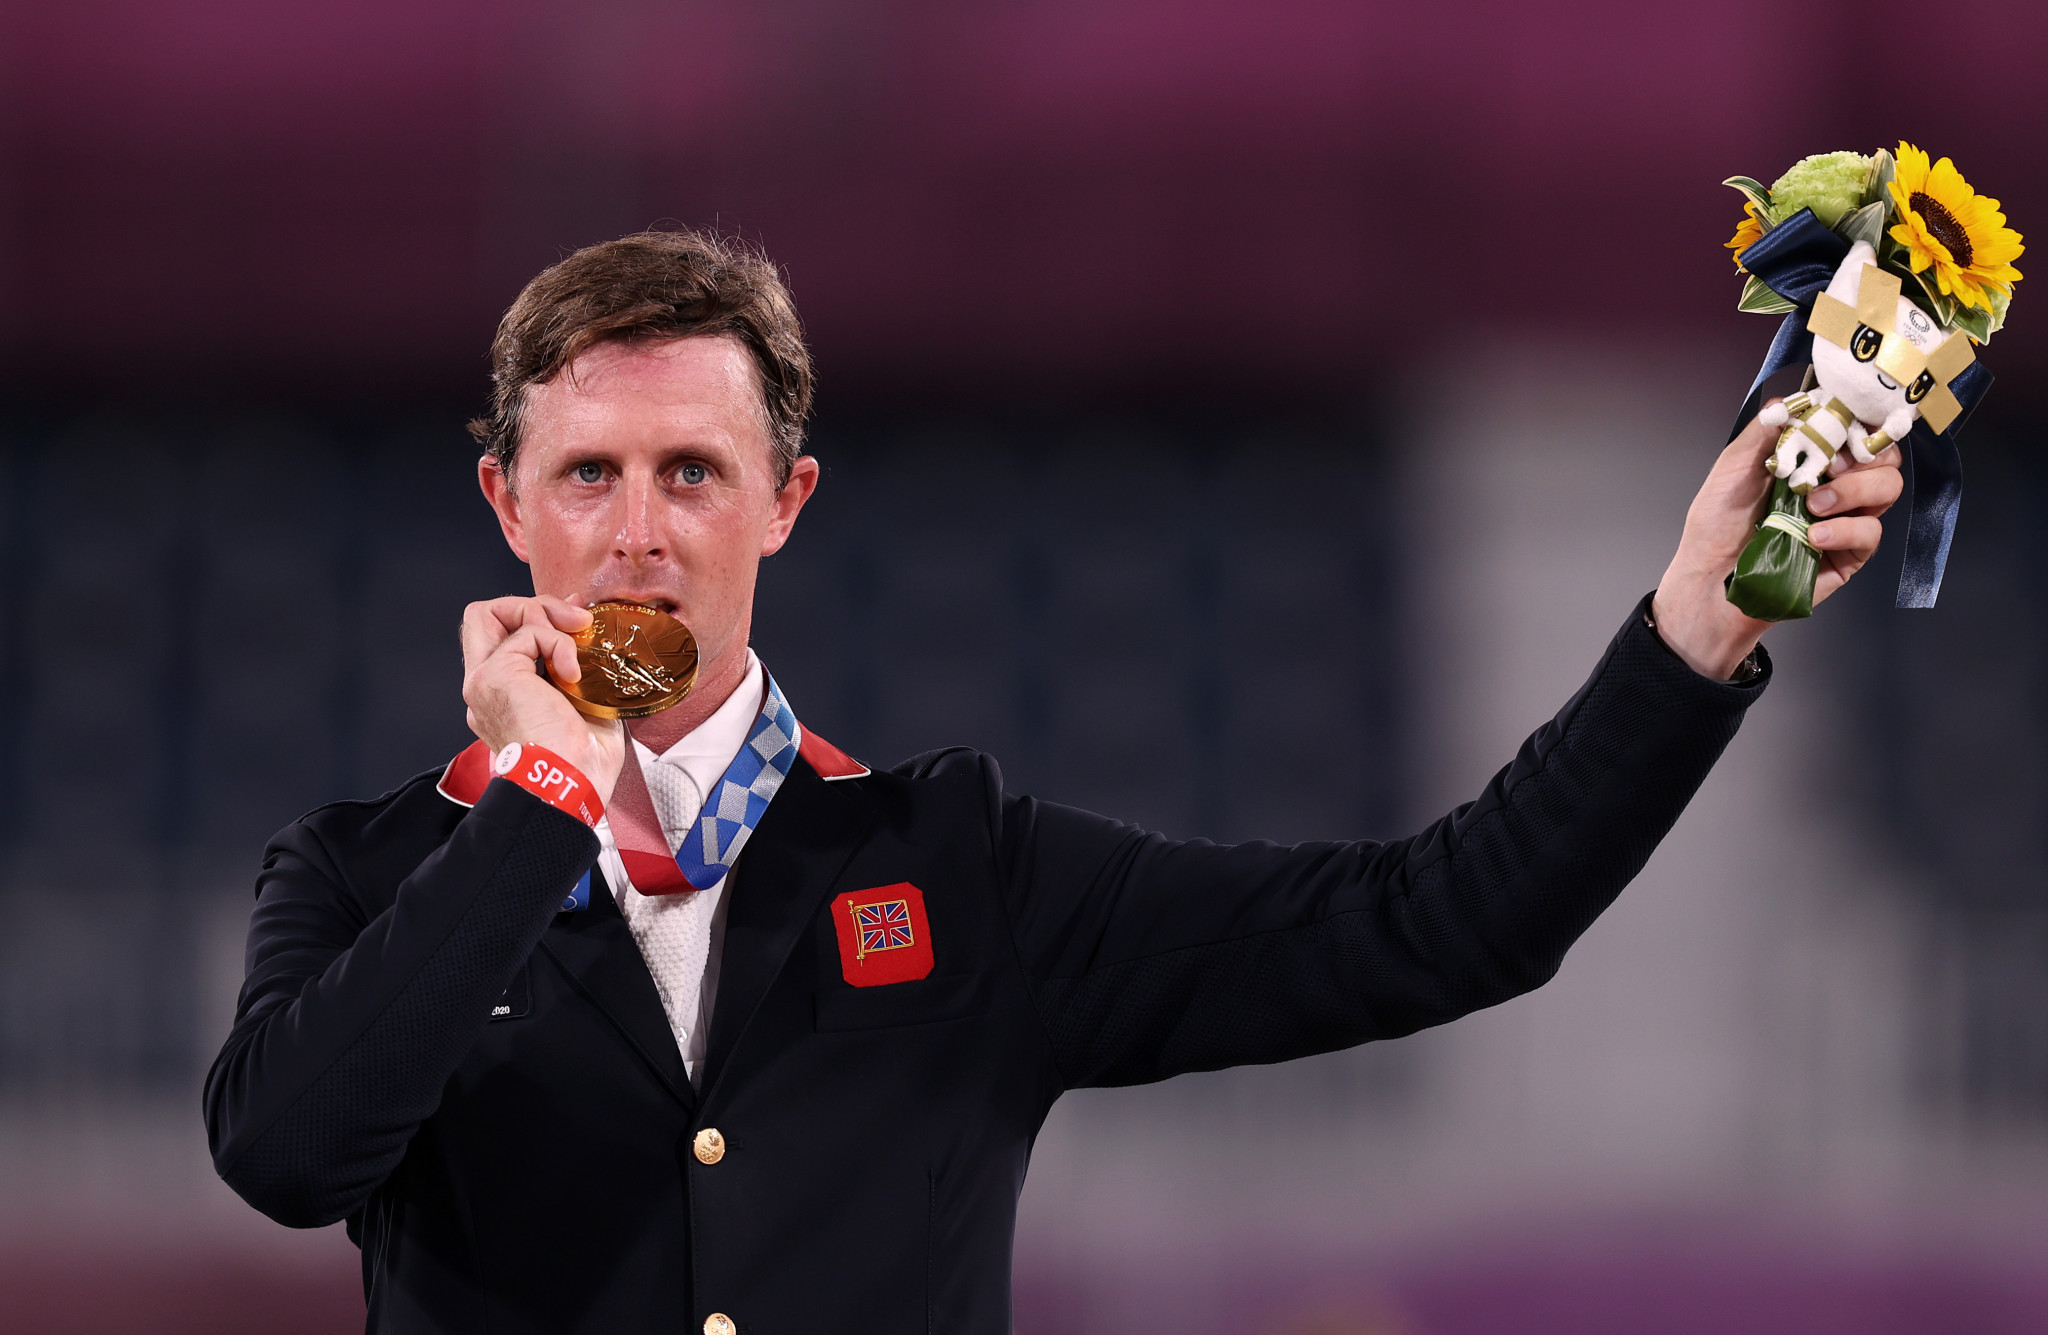 Despite suffering a fault, Olympic champion Ben Maher has joined Robert at the top of the standings, each on 228 points ©Getty Images